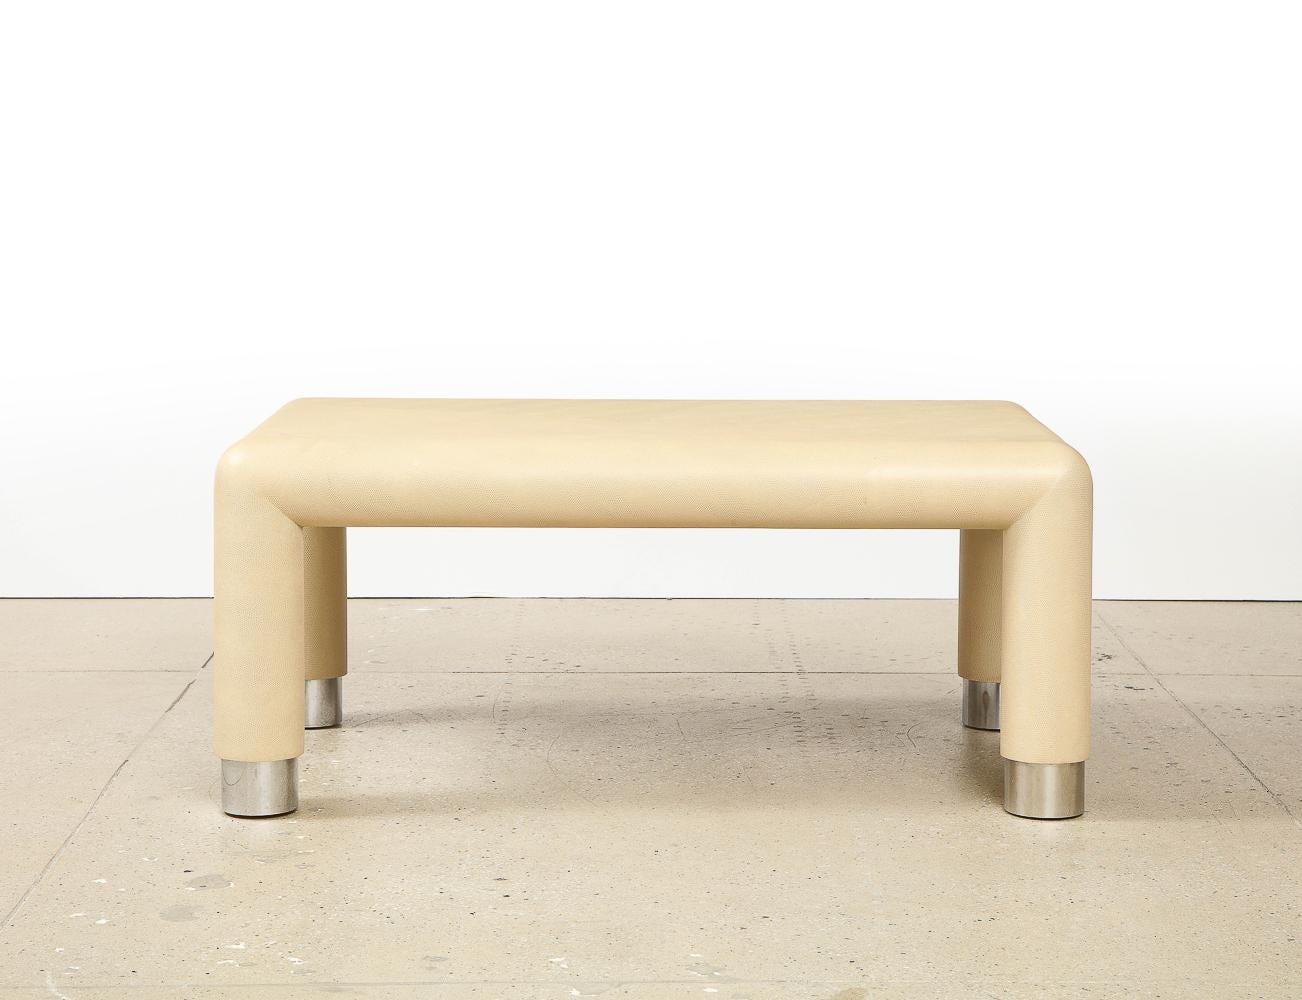 Wood, embossed leather and chromed metal. 2 cocktail tables of cream-colored leather, embossed with lizard pattern & chromed metal feet. Label affixed to the bottom of each table.